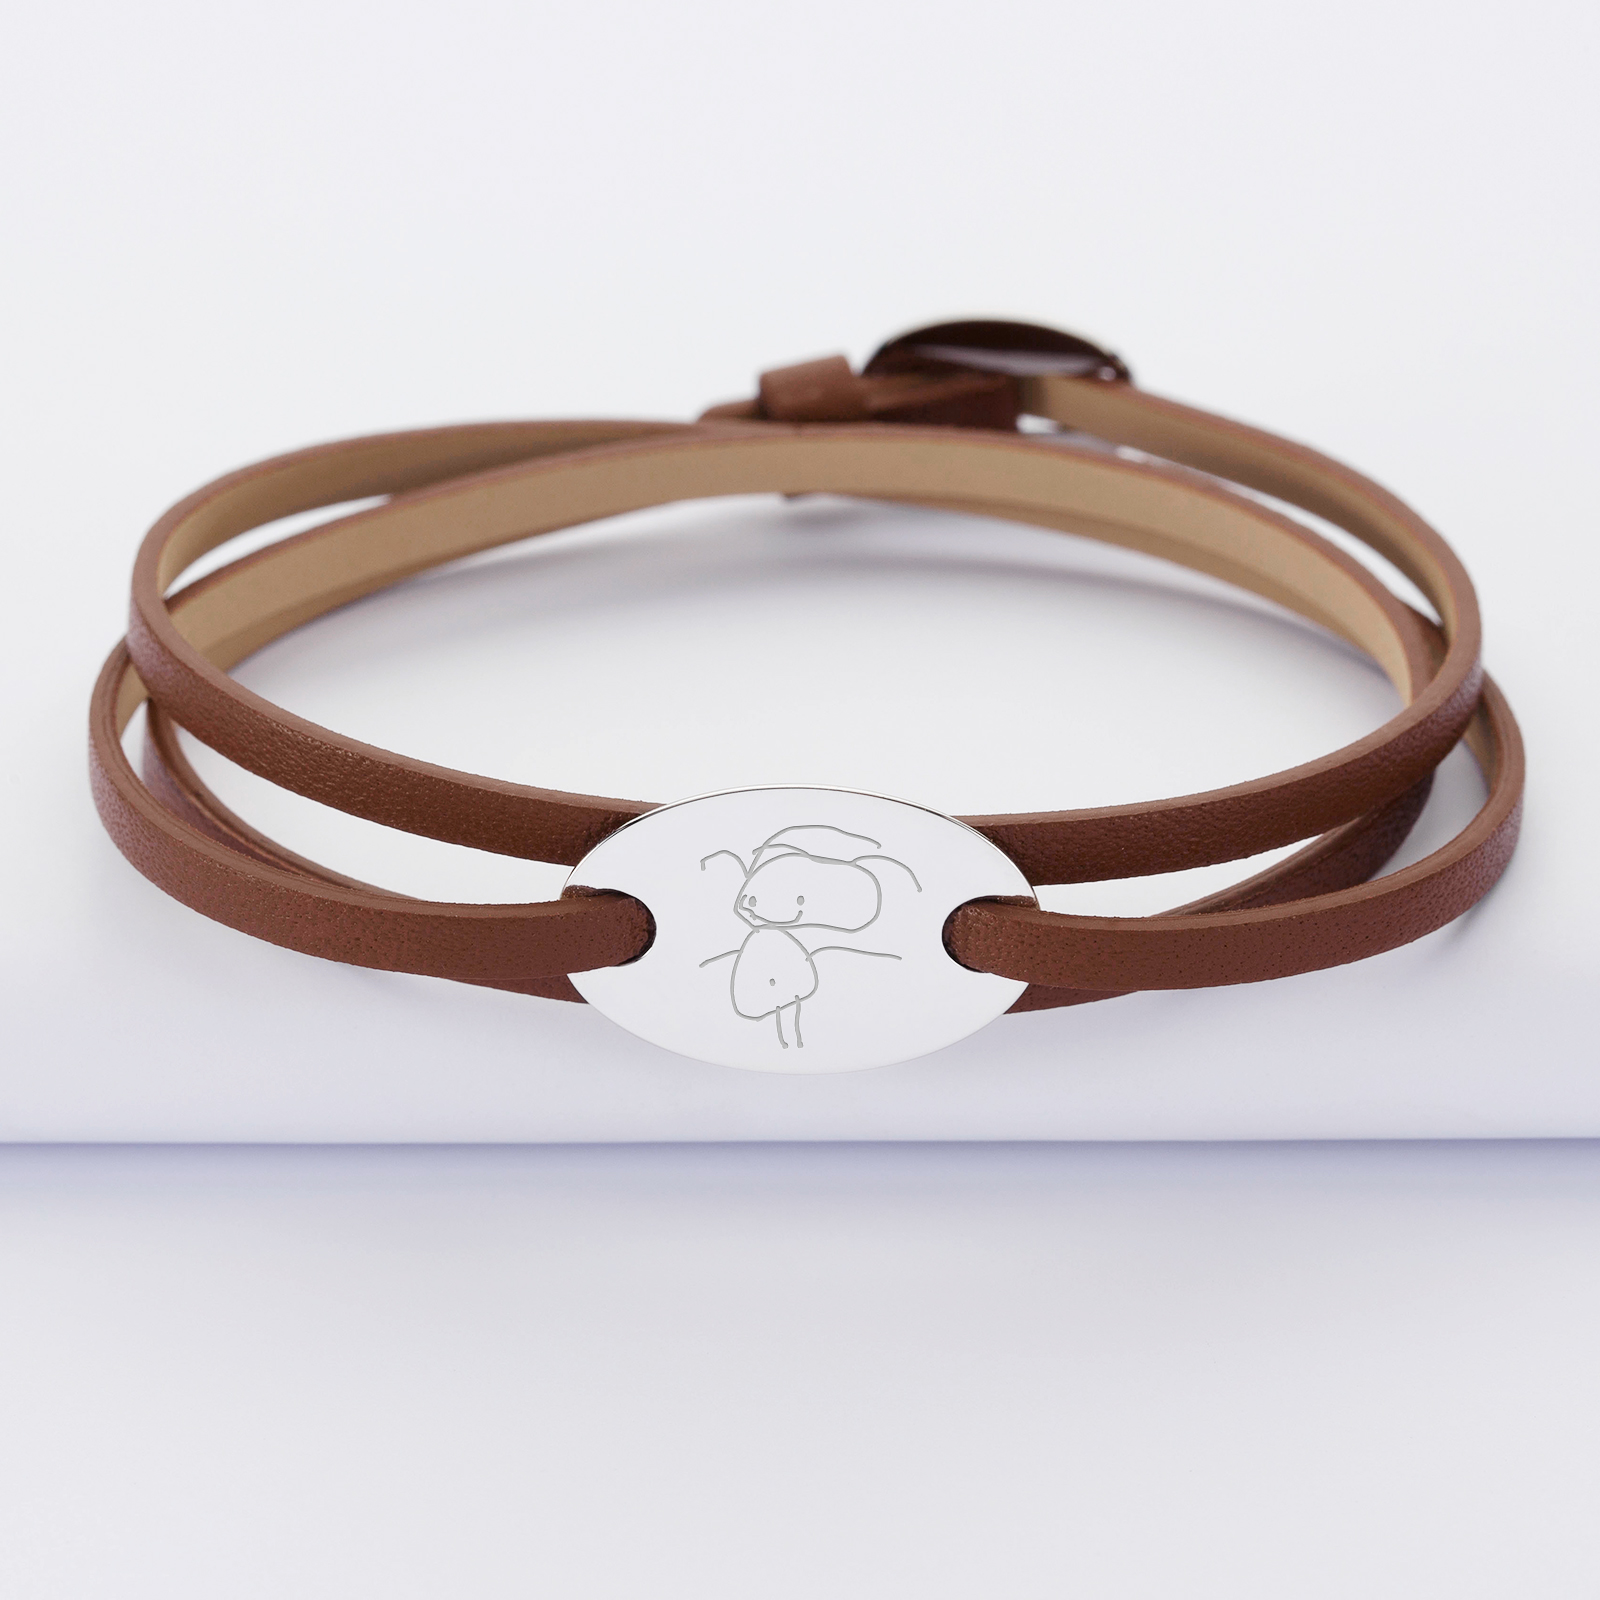 3 turn leather bracelet with personalised engraved oval 2-hole silver medallion 25x16mm - sketch